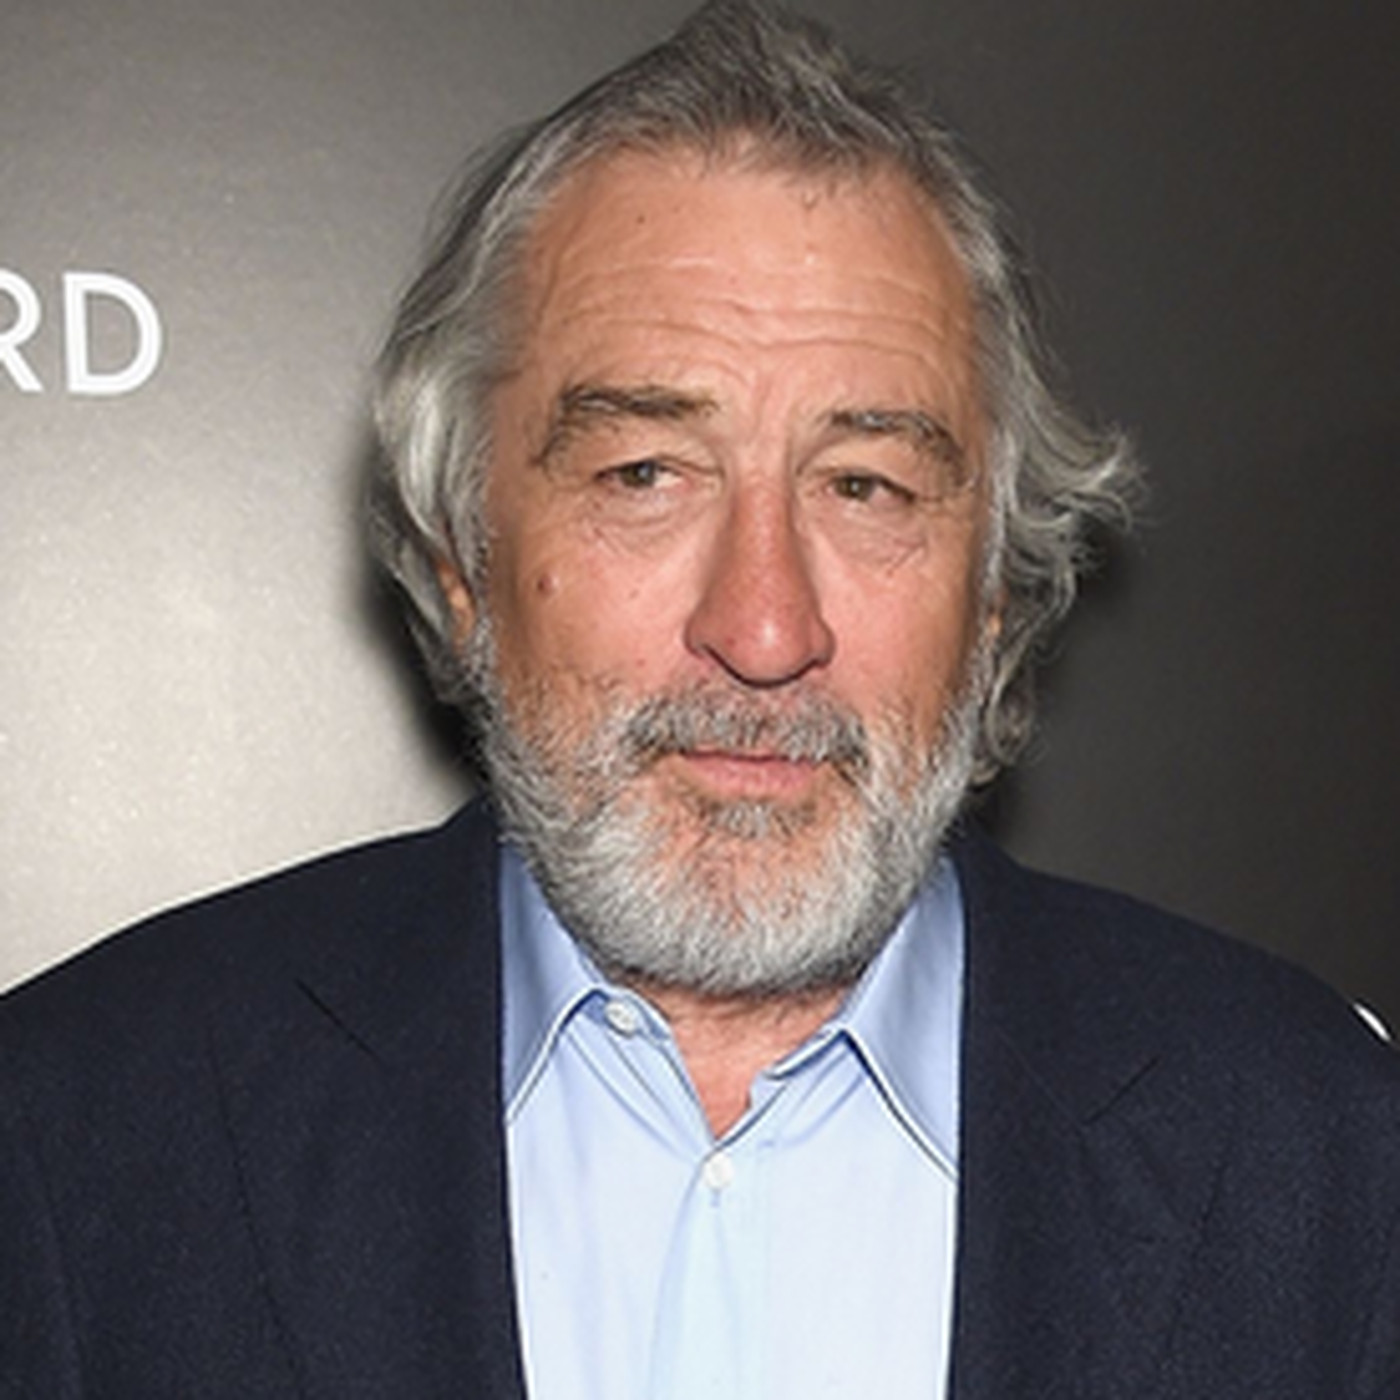 robert De Niro And Rfk Jr Have Joined Forces To Push Vaccine Nonsense Vox